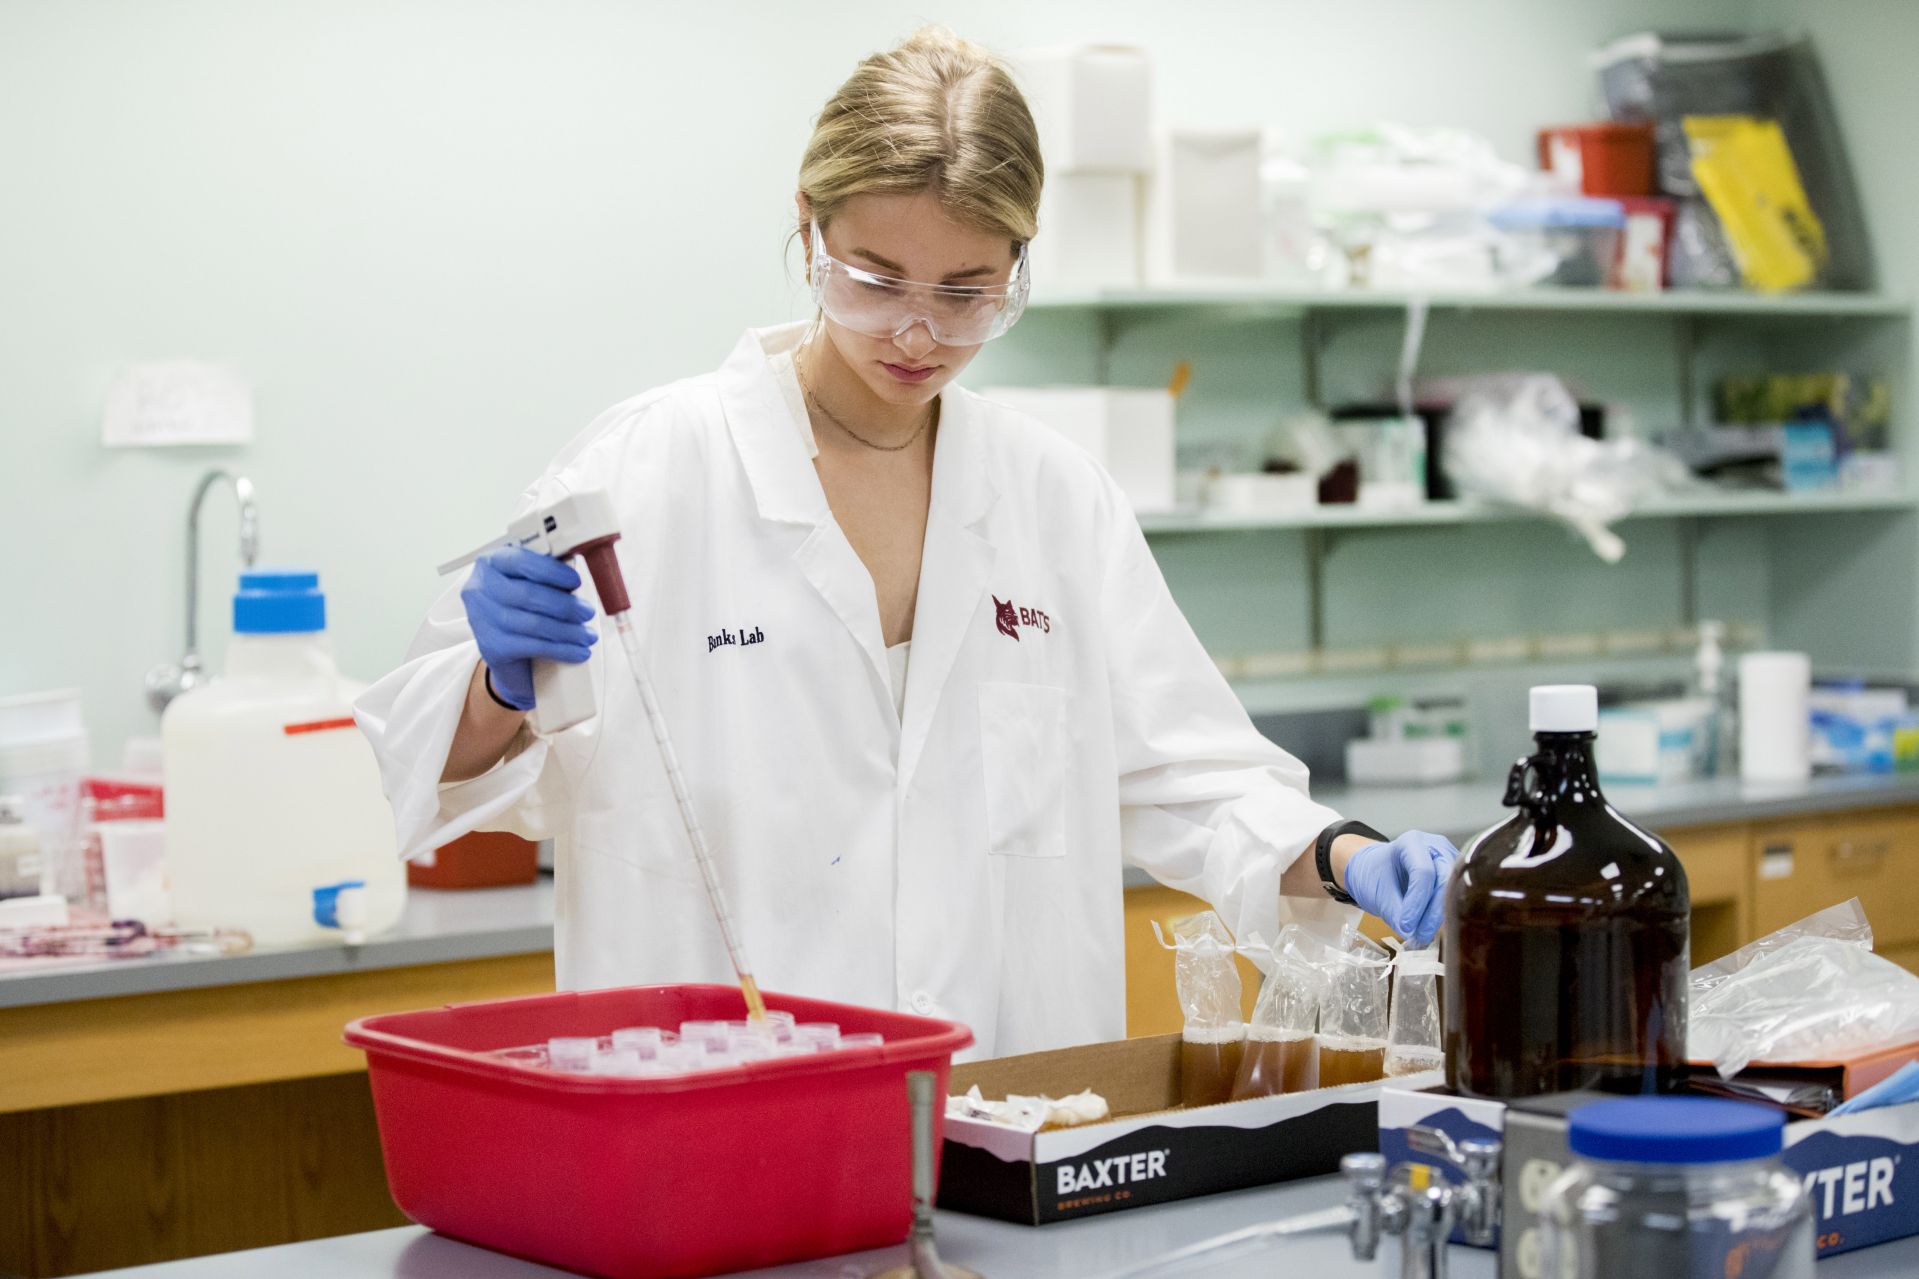 Emily Tamkin '22, a biology major from Lafayette, Calif., is doing a summer '21 purposeful work internship tin brewing science, partnering with the Baxter Brewing Co. in Lewiston, where she's studying the number of battering compounds that exist in beer throughout the brewing process. She is working under the supervision of Merritt Waldron, Baxter's quality control manager, and Assistant Professor of Biology Lori Banks.  Emily picks up samples from Baxter's plant at 130 Mill Street in Lewiston and takes them to Carnegie Science where, in Dr. Bank's lab, she conducts a chemical analysis of them. The compounds hit your taste buds, and your brain understands that they are bitter, she says.